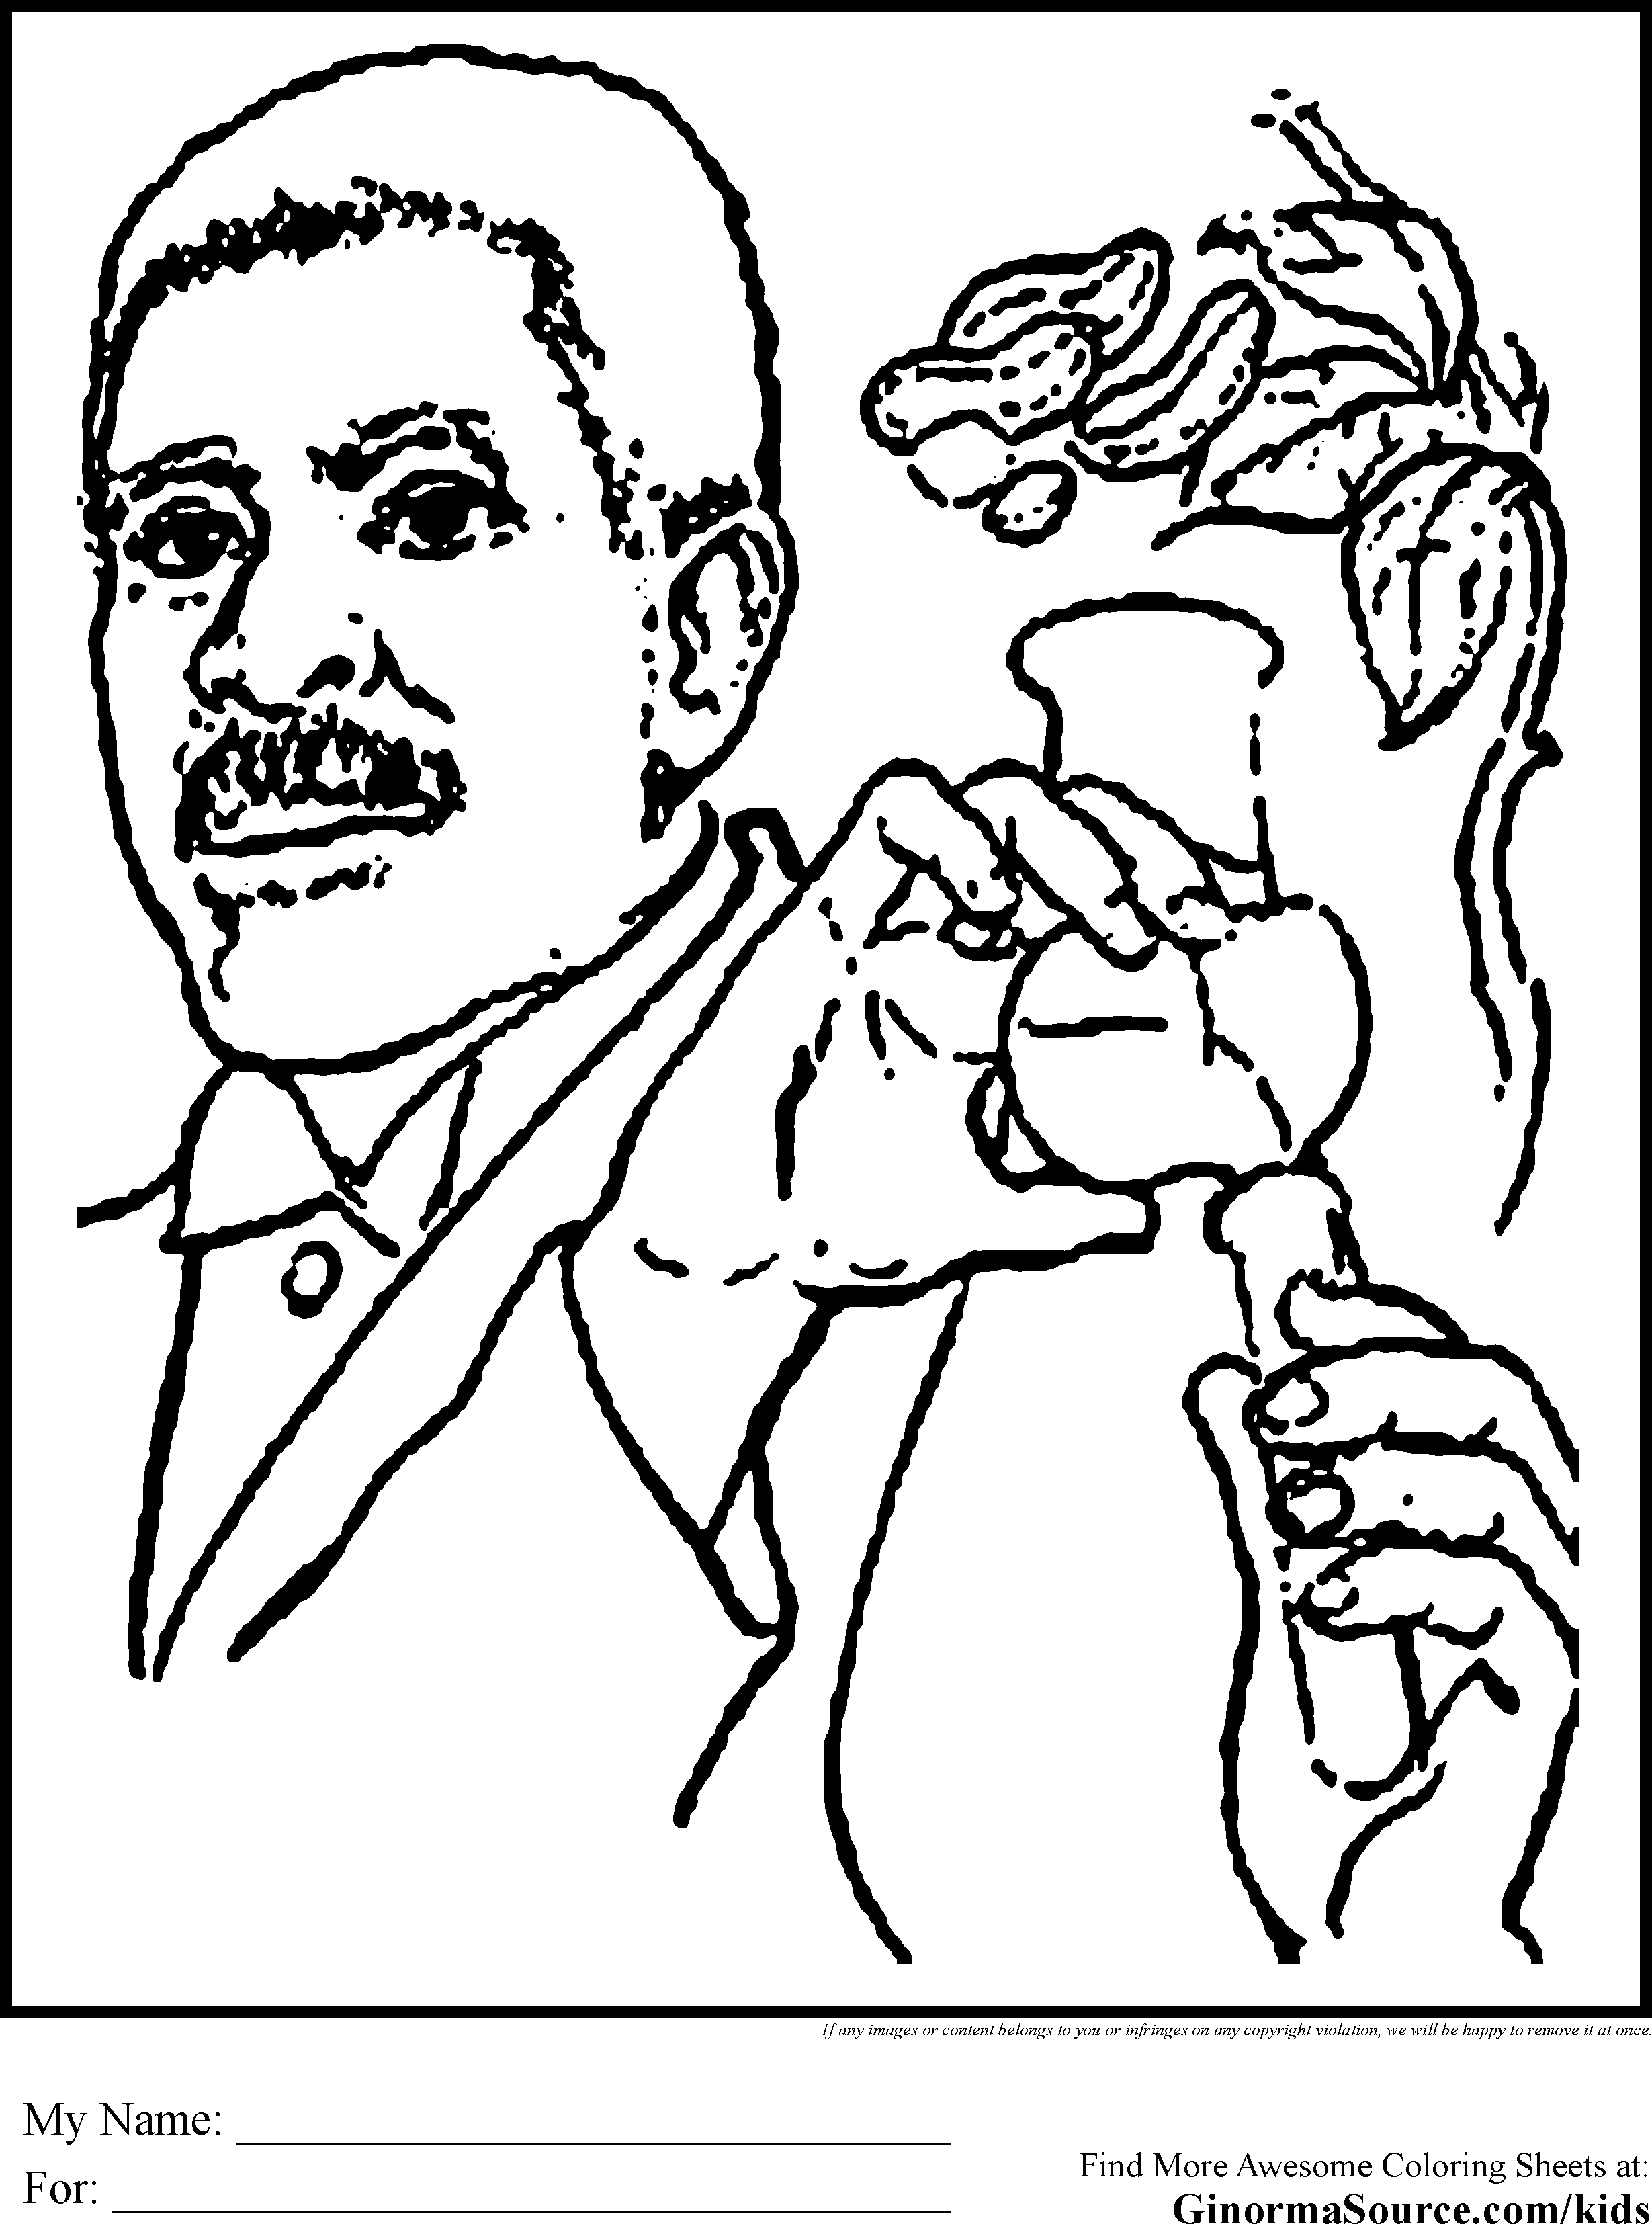 George Washington Carver Coloring Page Coloring Home